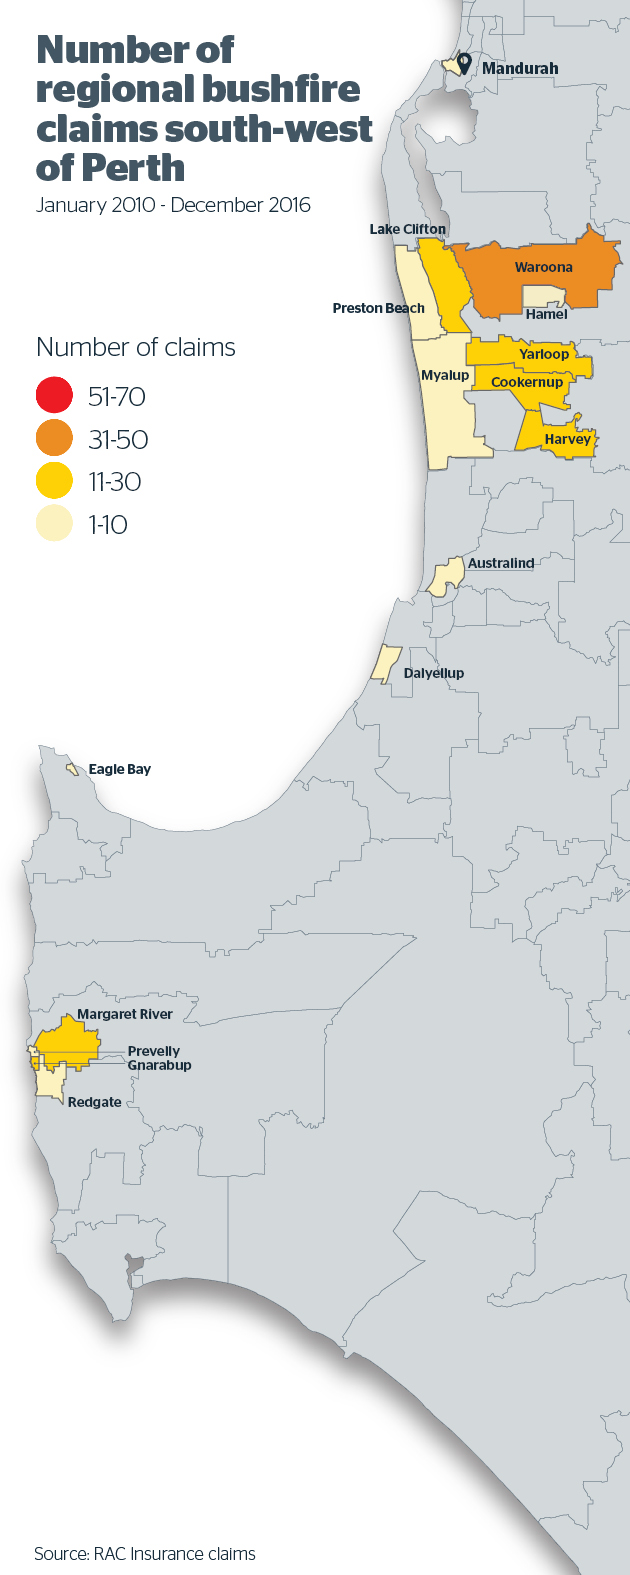 An infographic of bushfires in South West WA